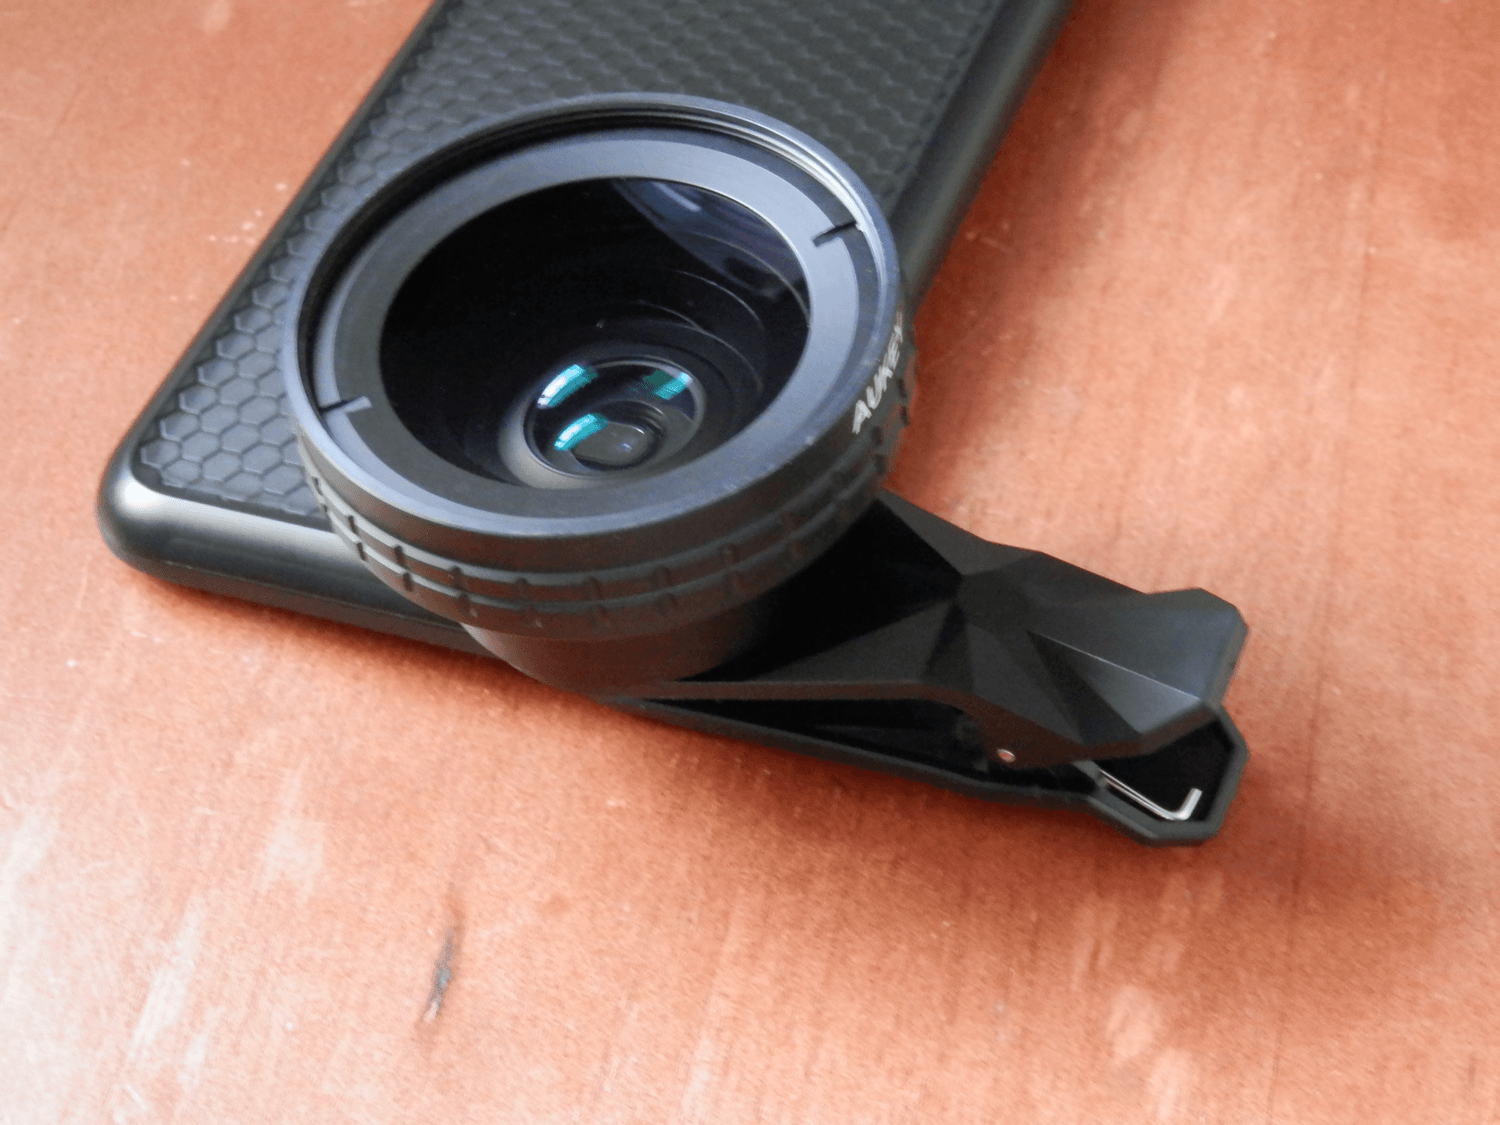 Aukey's Ora 2 In 1 Lens System For IPhone Helps Expand Your